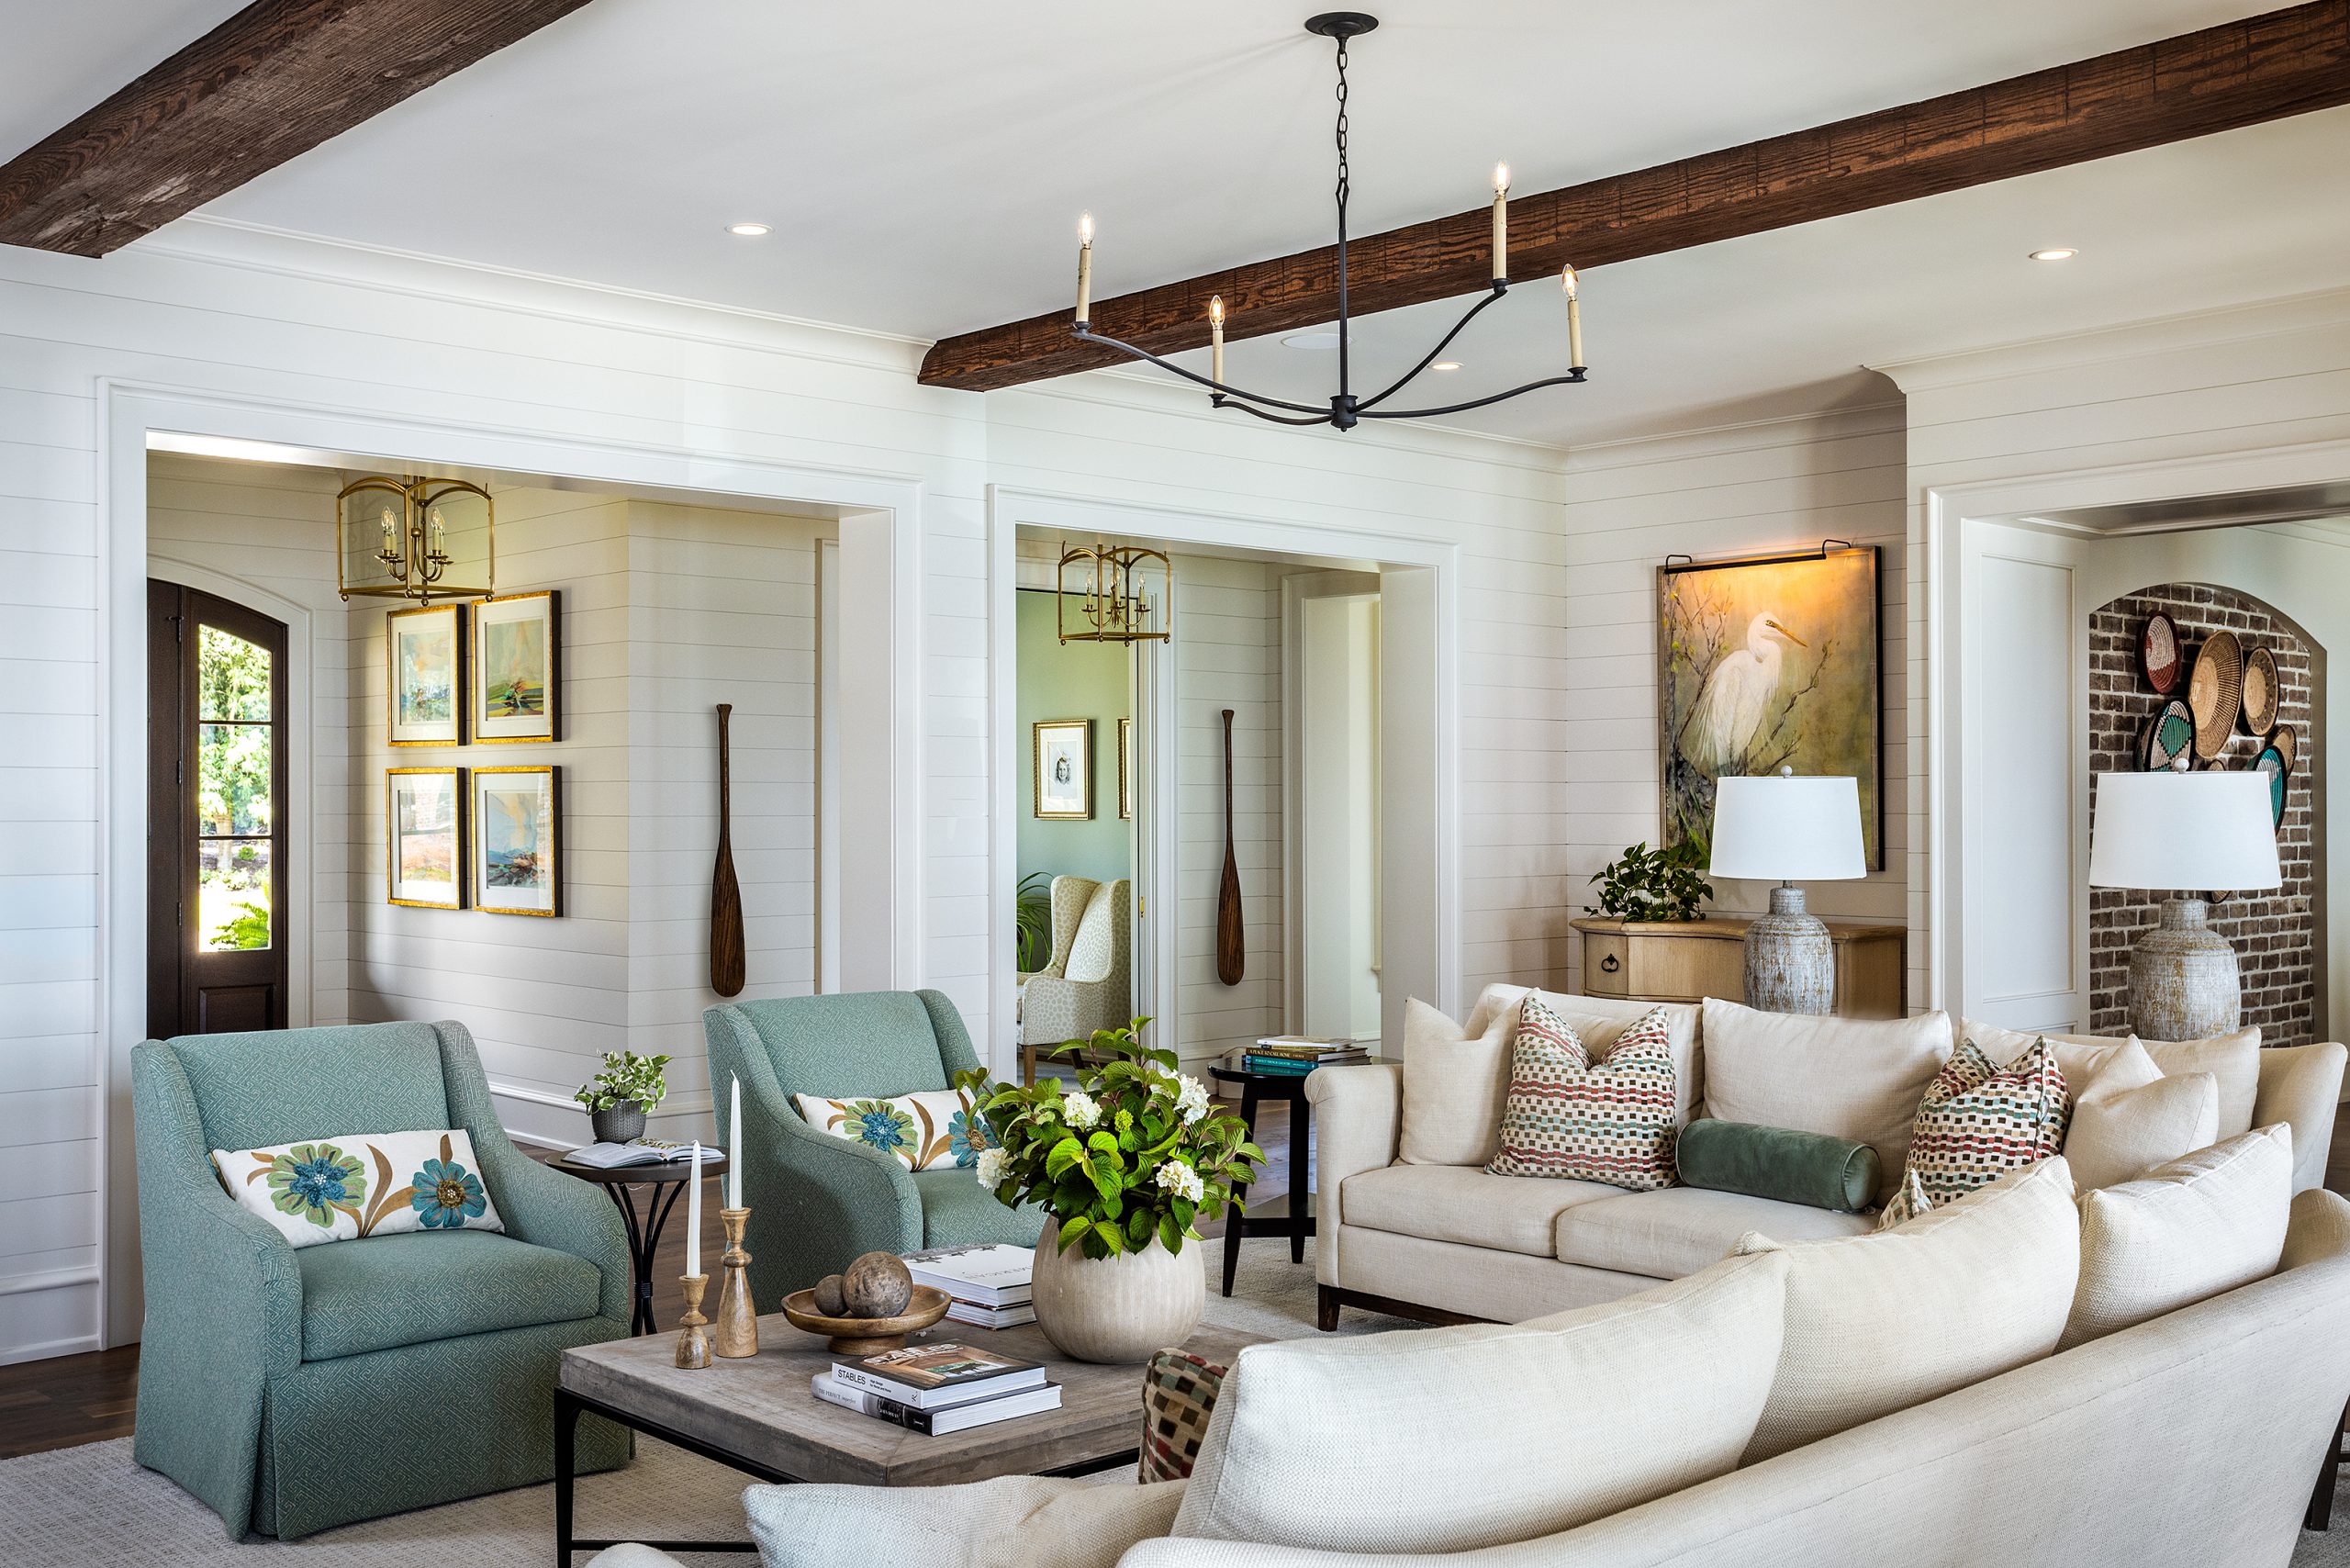 The white shiplap walls are reminiscent of the original cabin that once sat by the lake, as are the exposed beams and pair of oars hanging in the hallway. The room is bright and airy, opening onto a bluestone balcony beside the saltwater pool and spa. Home styled for photography by Sheila Andrade with Black Barn Home.